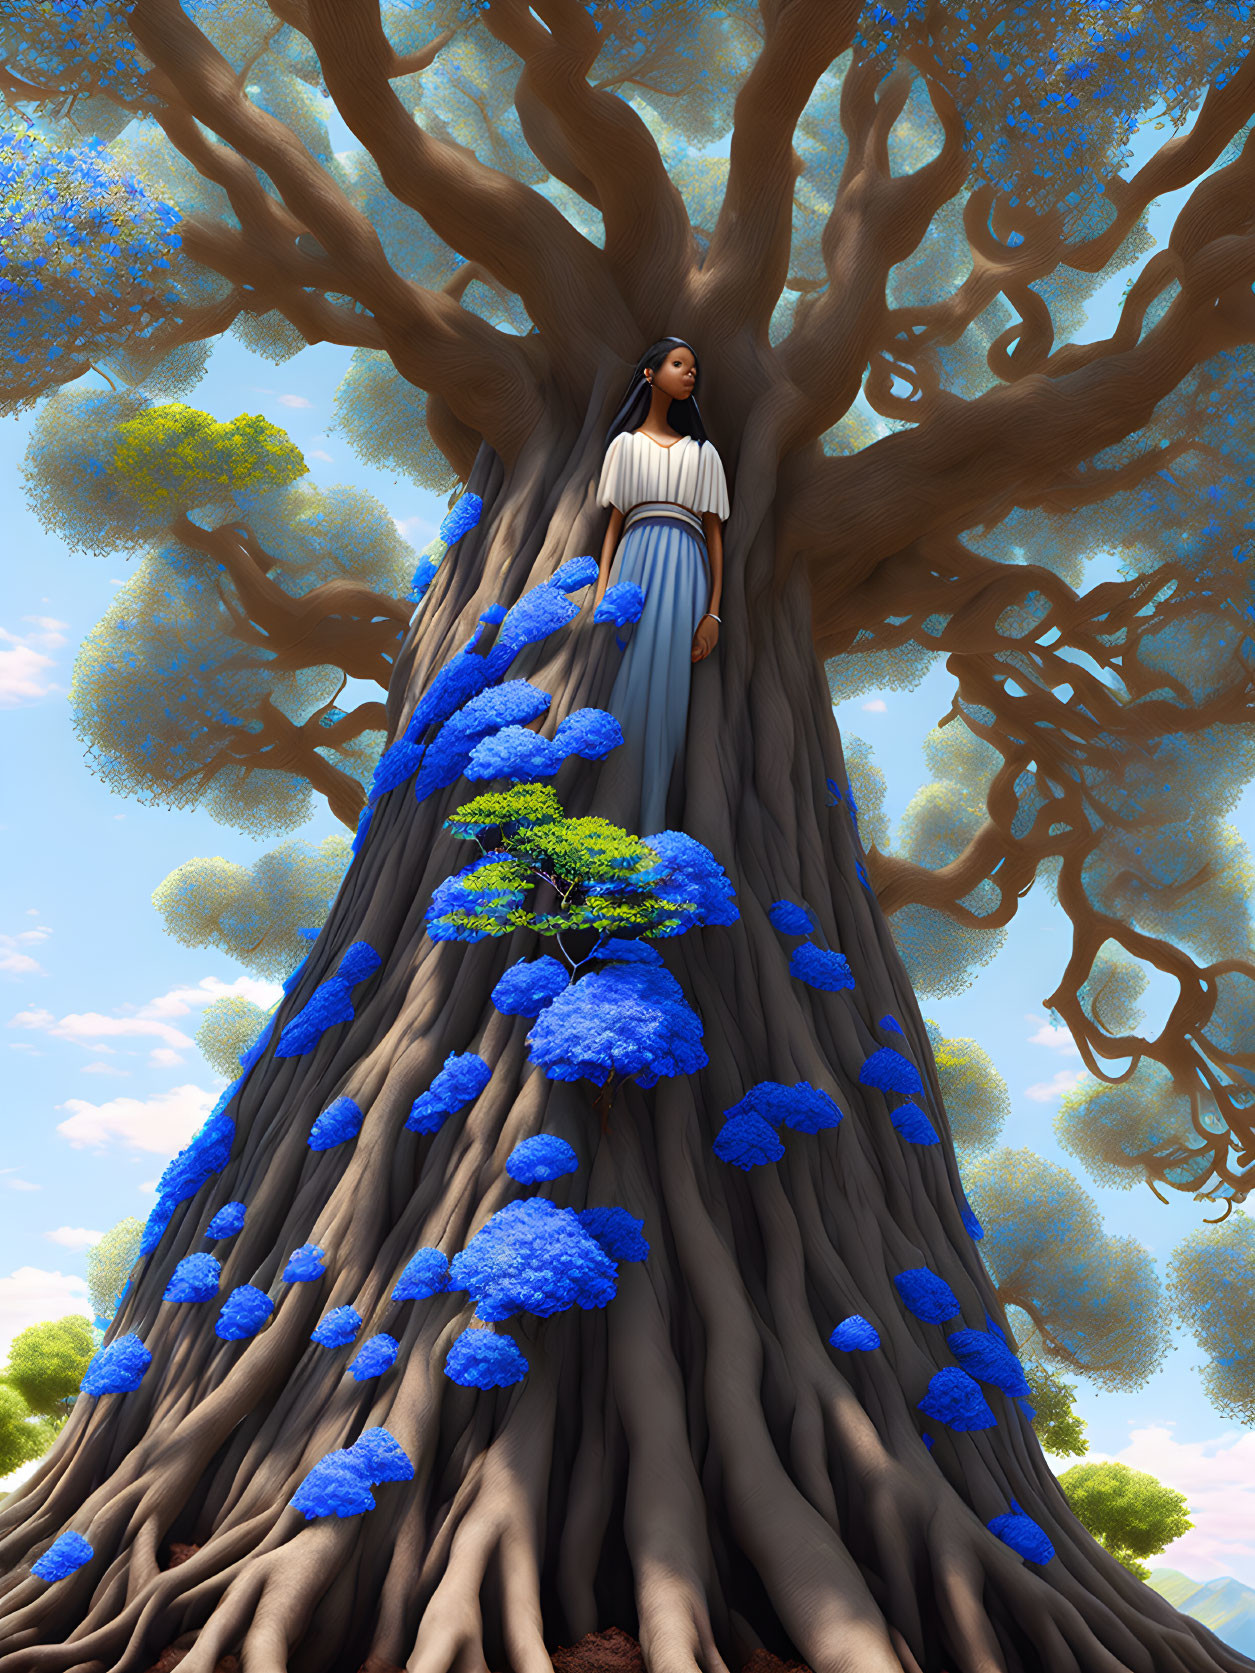 Woman in White and Blue Dress Standing on Massive Tree Roots under Clear Sky